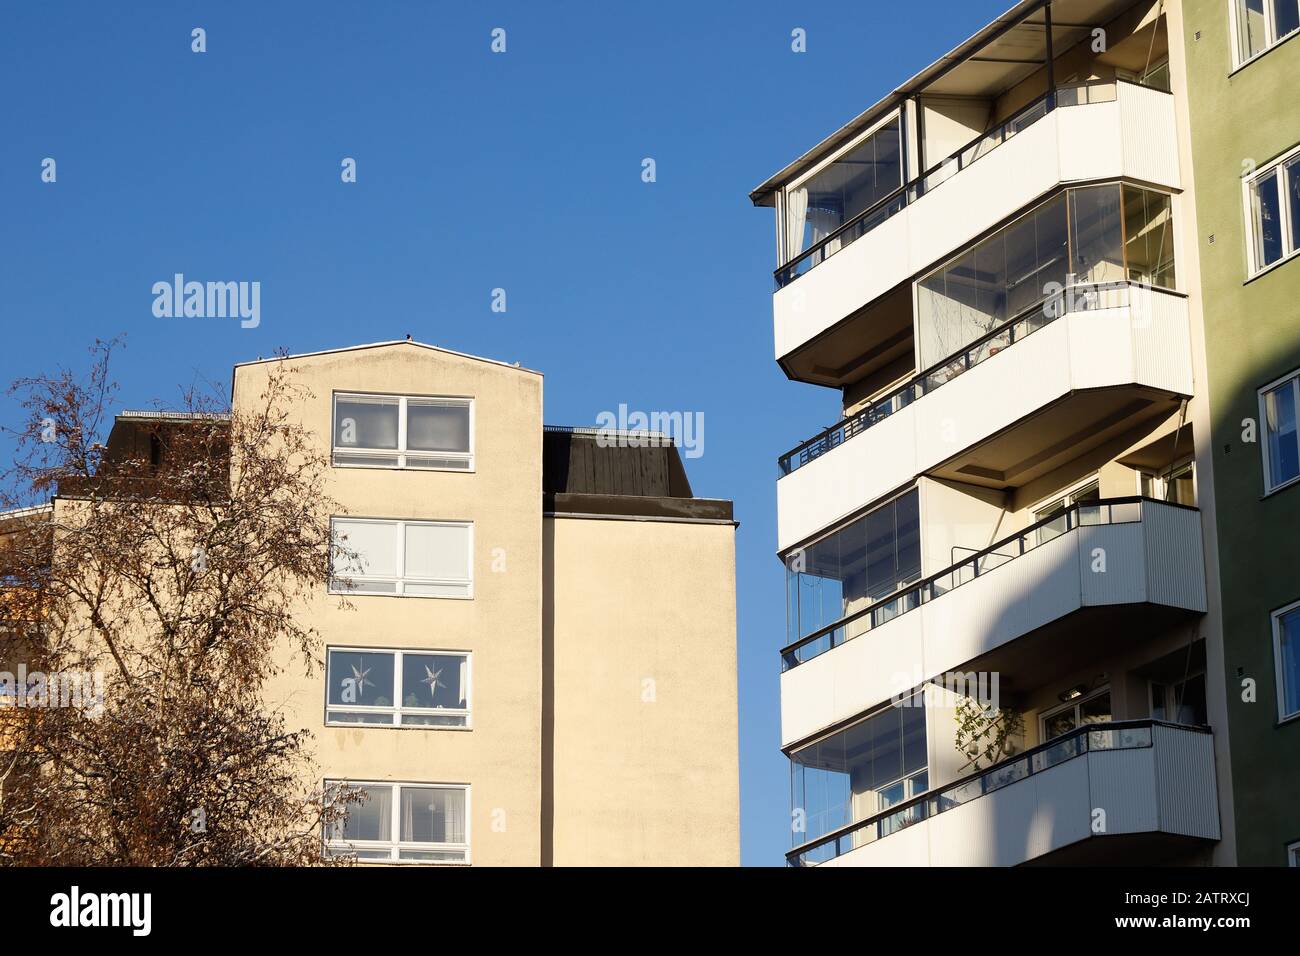 View of two residential multi story buildings constructed during 1950s and 1960s era. Stock Photo